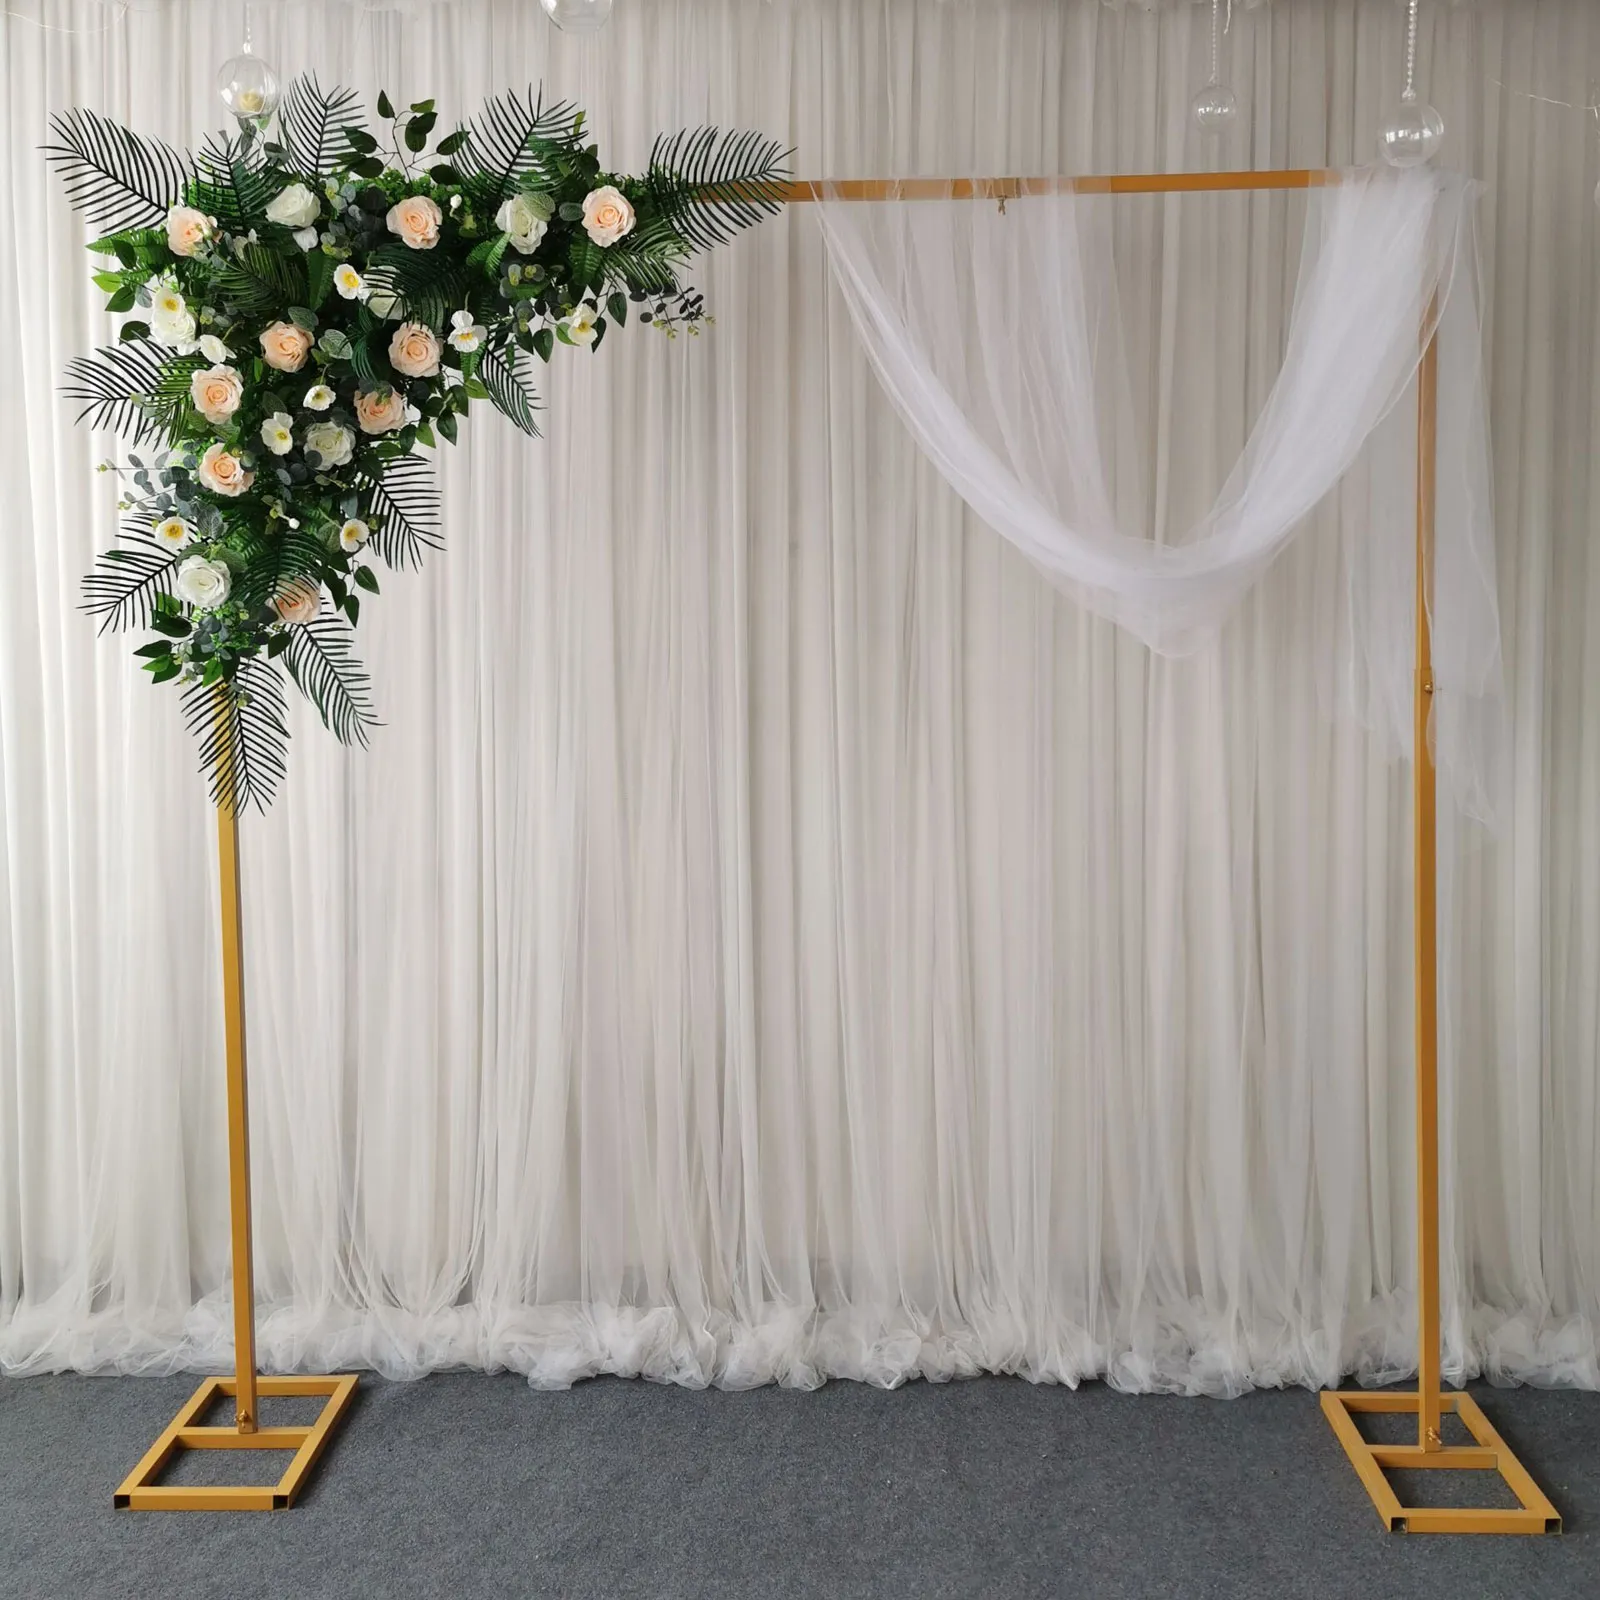 High Quality Wedding Background Arch Frame Iron Flower Balloon Stand Backdrop Venue Decoration Party Application Beautiful Arch